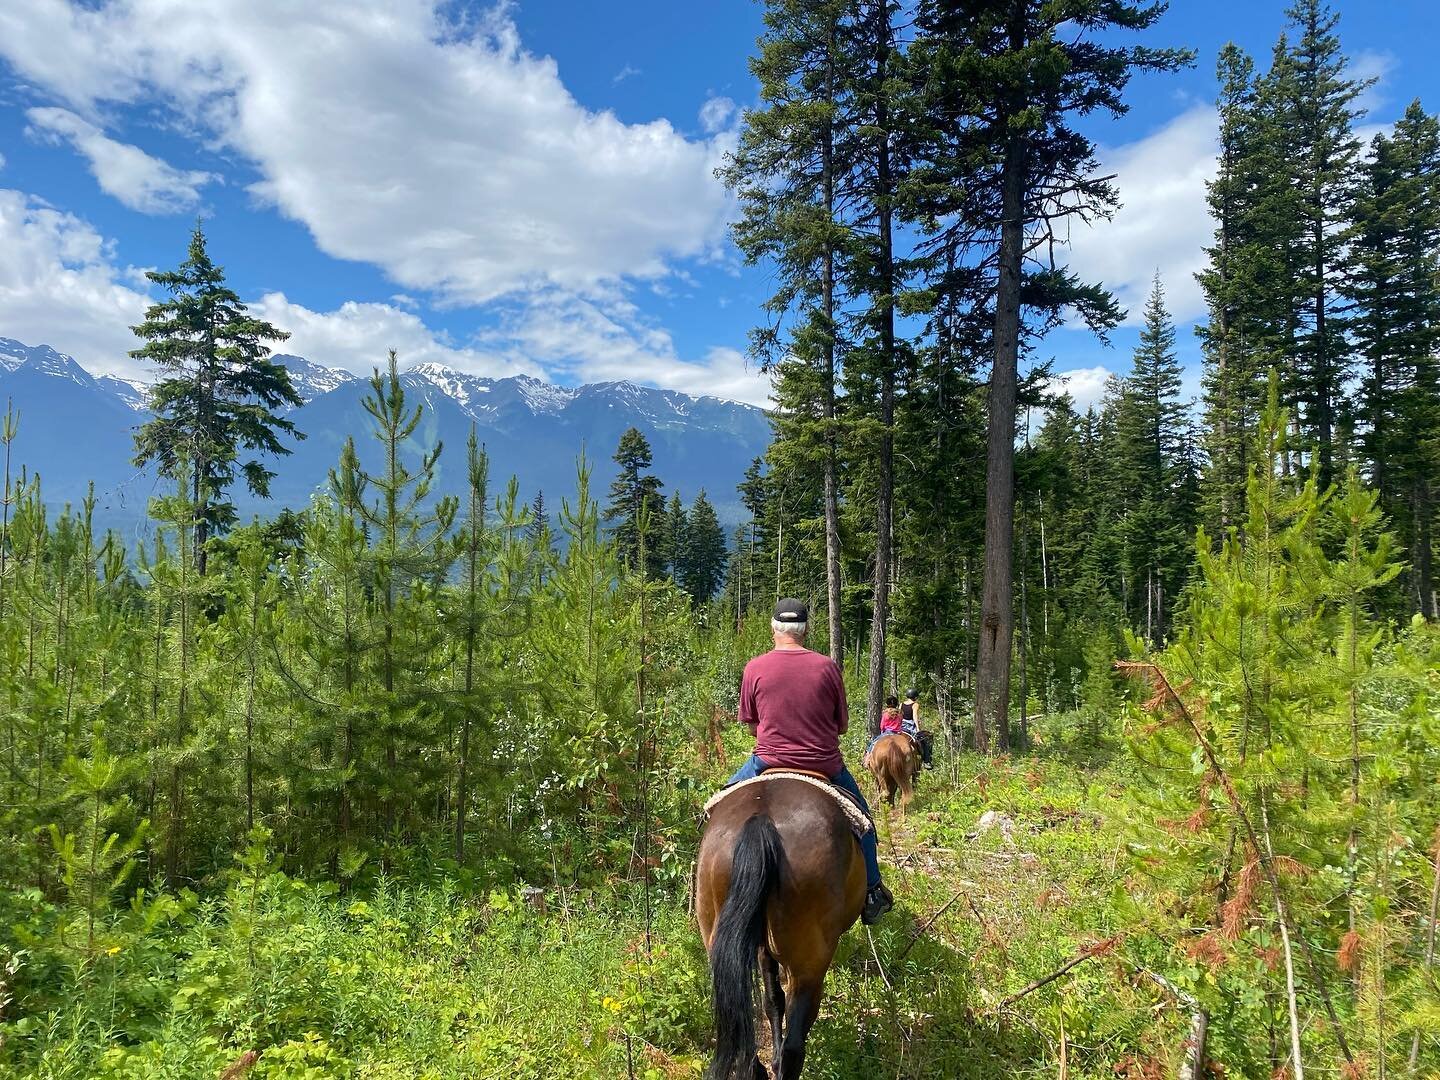 A day in the saddle is never wasted! Started the morning off taking George and his granddaughters riding. George brought his granddaughters out a few years ago for a first time horse experience. Now they have gone on to lessons at home in Alberta, an